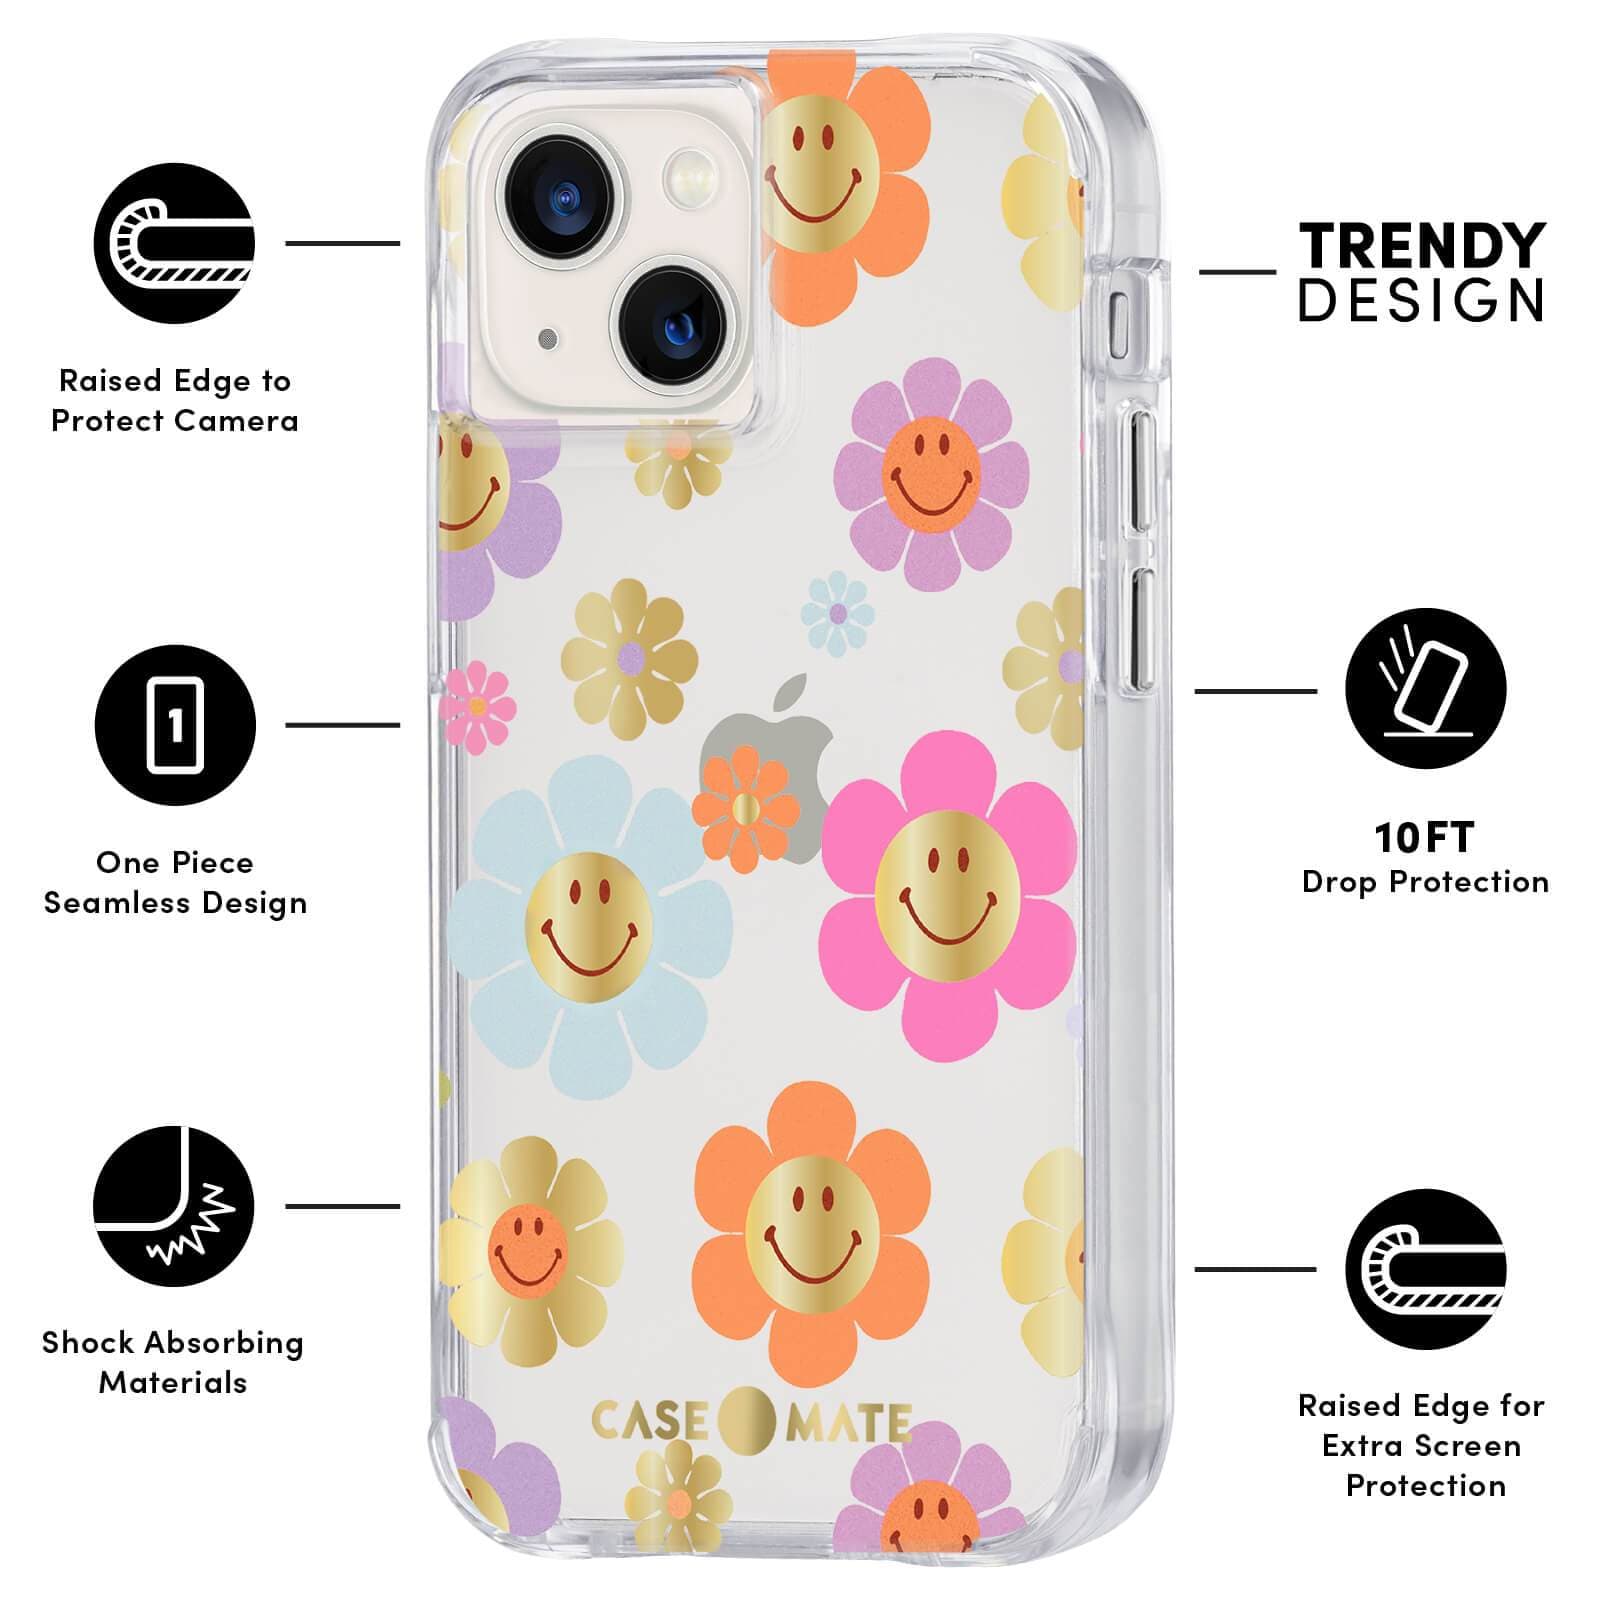 FEATURES: RAISED EDGE TO PROTECT CAMERA, ONE PIECE SEAMLESS DESIGN, SHOCK ABSORBING MATERIALS, TRENDY DESIGN, 10 FT DROP PROTECTION, RAISED EDGE FOR EXTRA SCREEN PROTECTION. COLOR::RETRO FLOWERS